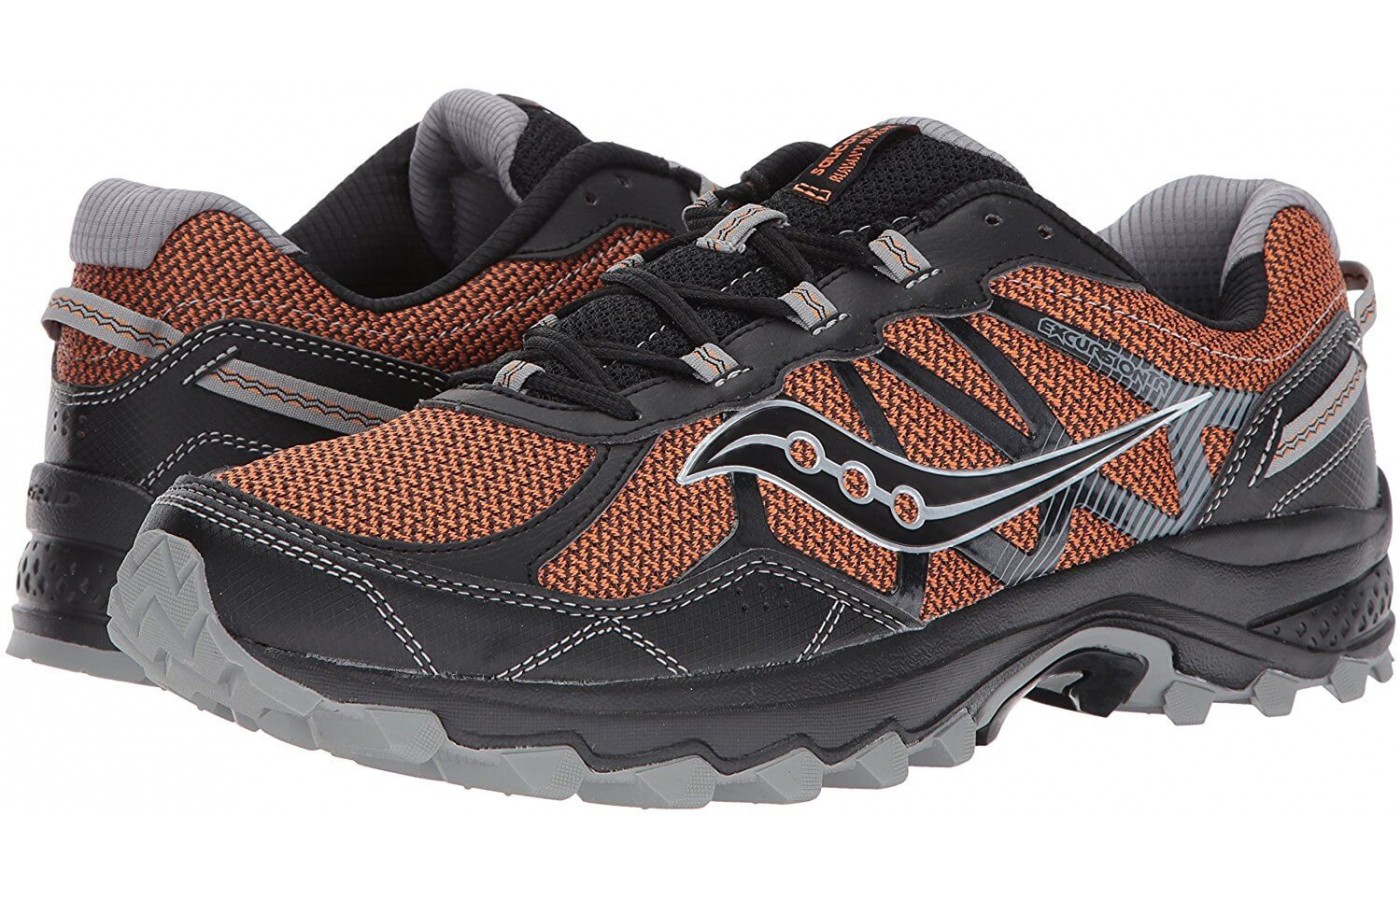 The Saucony Excursion TR11 also has a GRID cushioning system